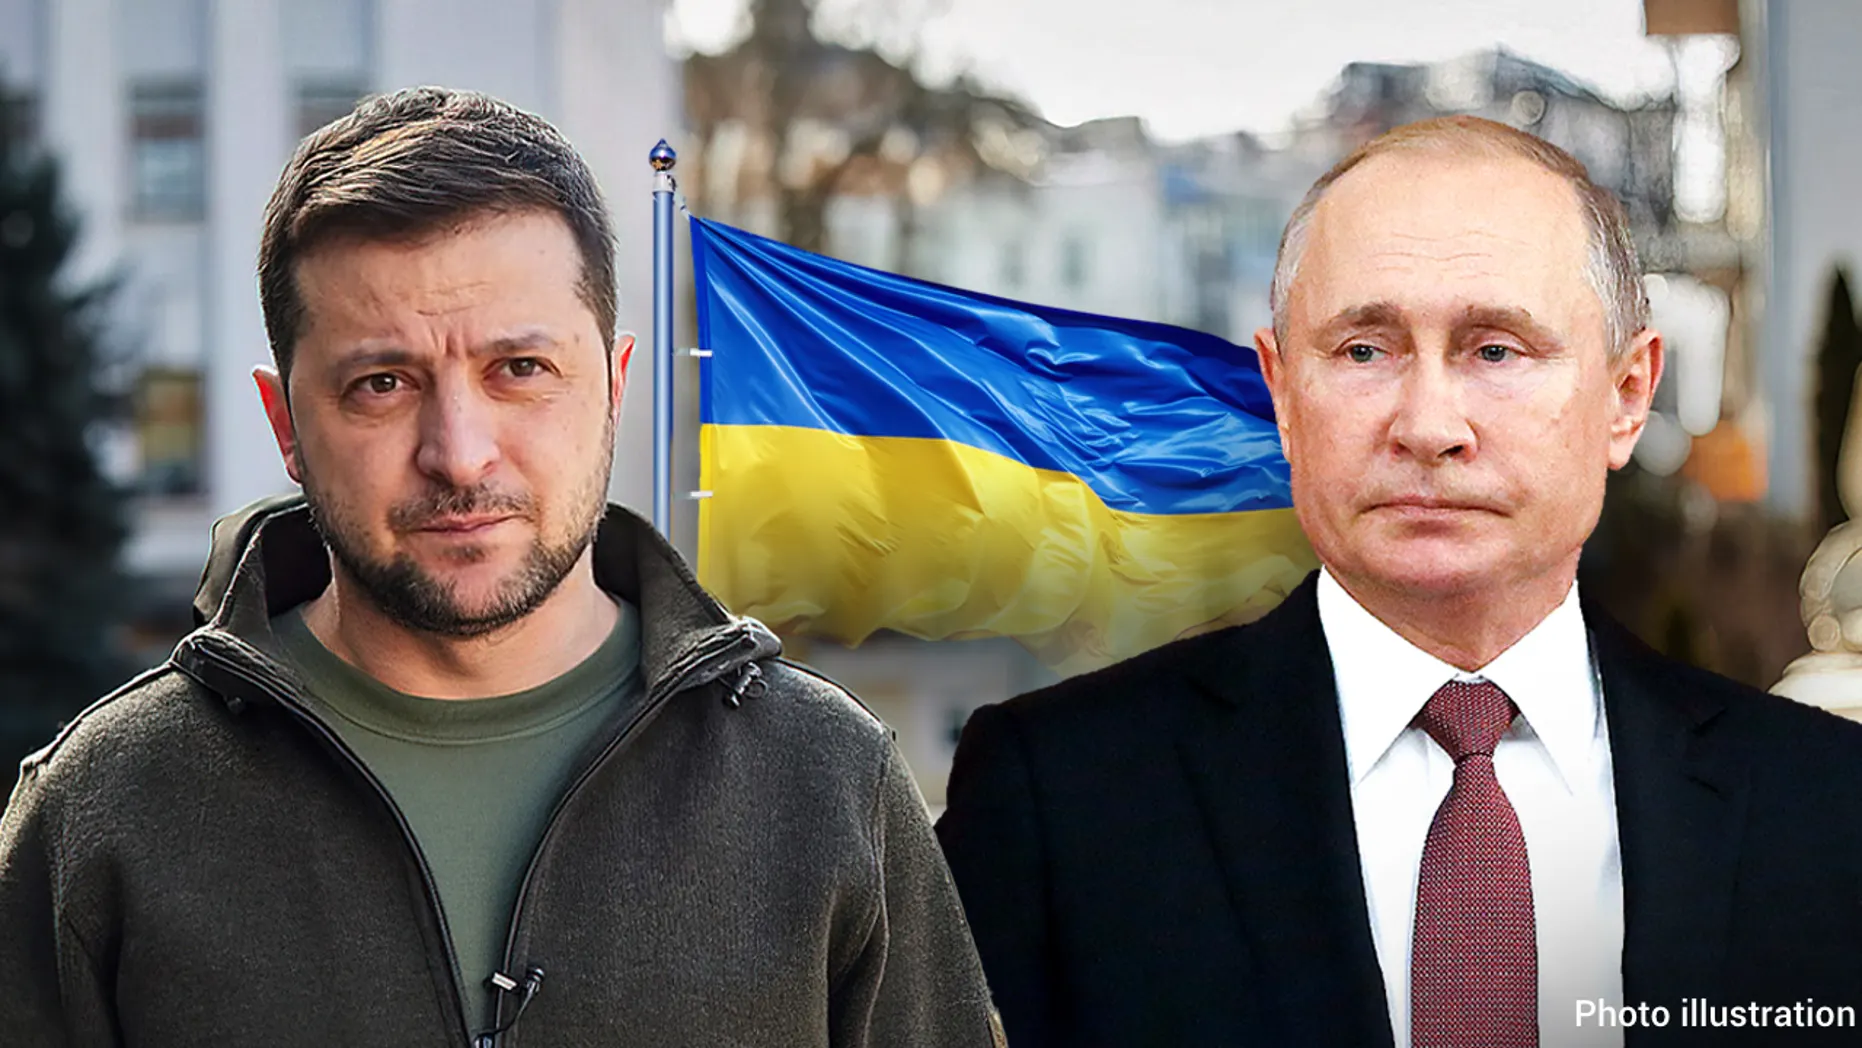 Zelenskyy pleads with France, Germany to help free captured mayor: 'I'll talk to whoever I need to talk to'